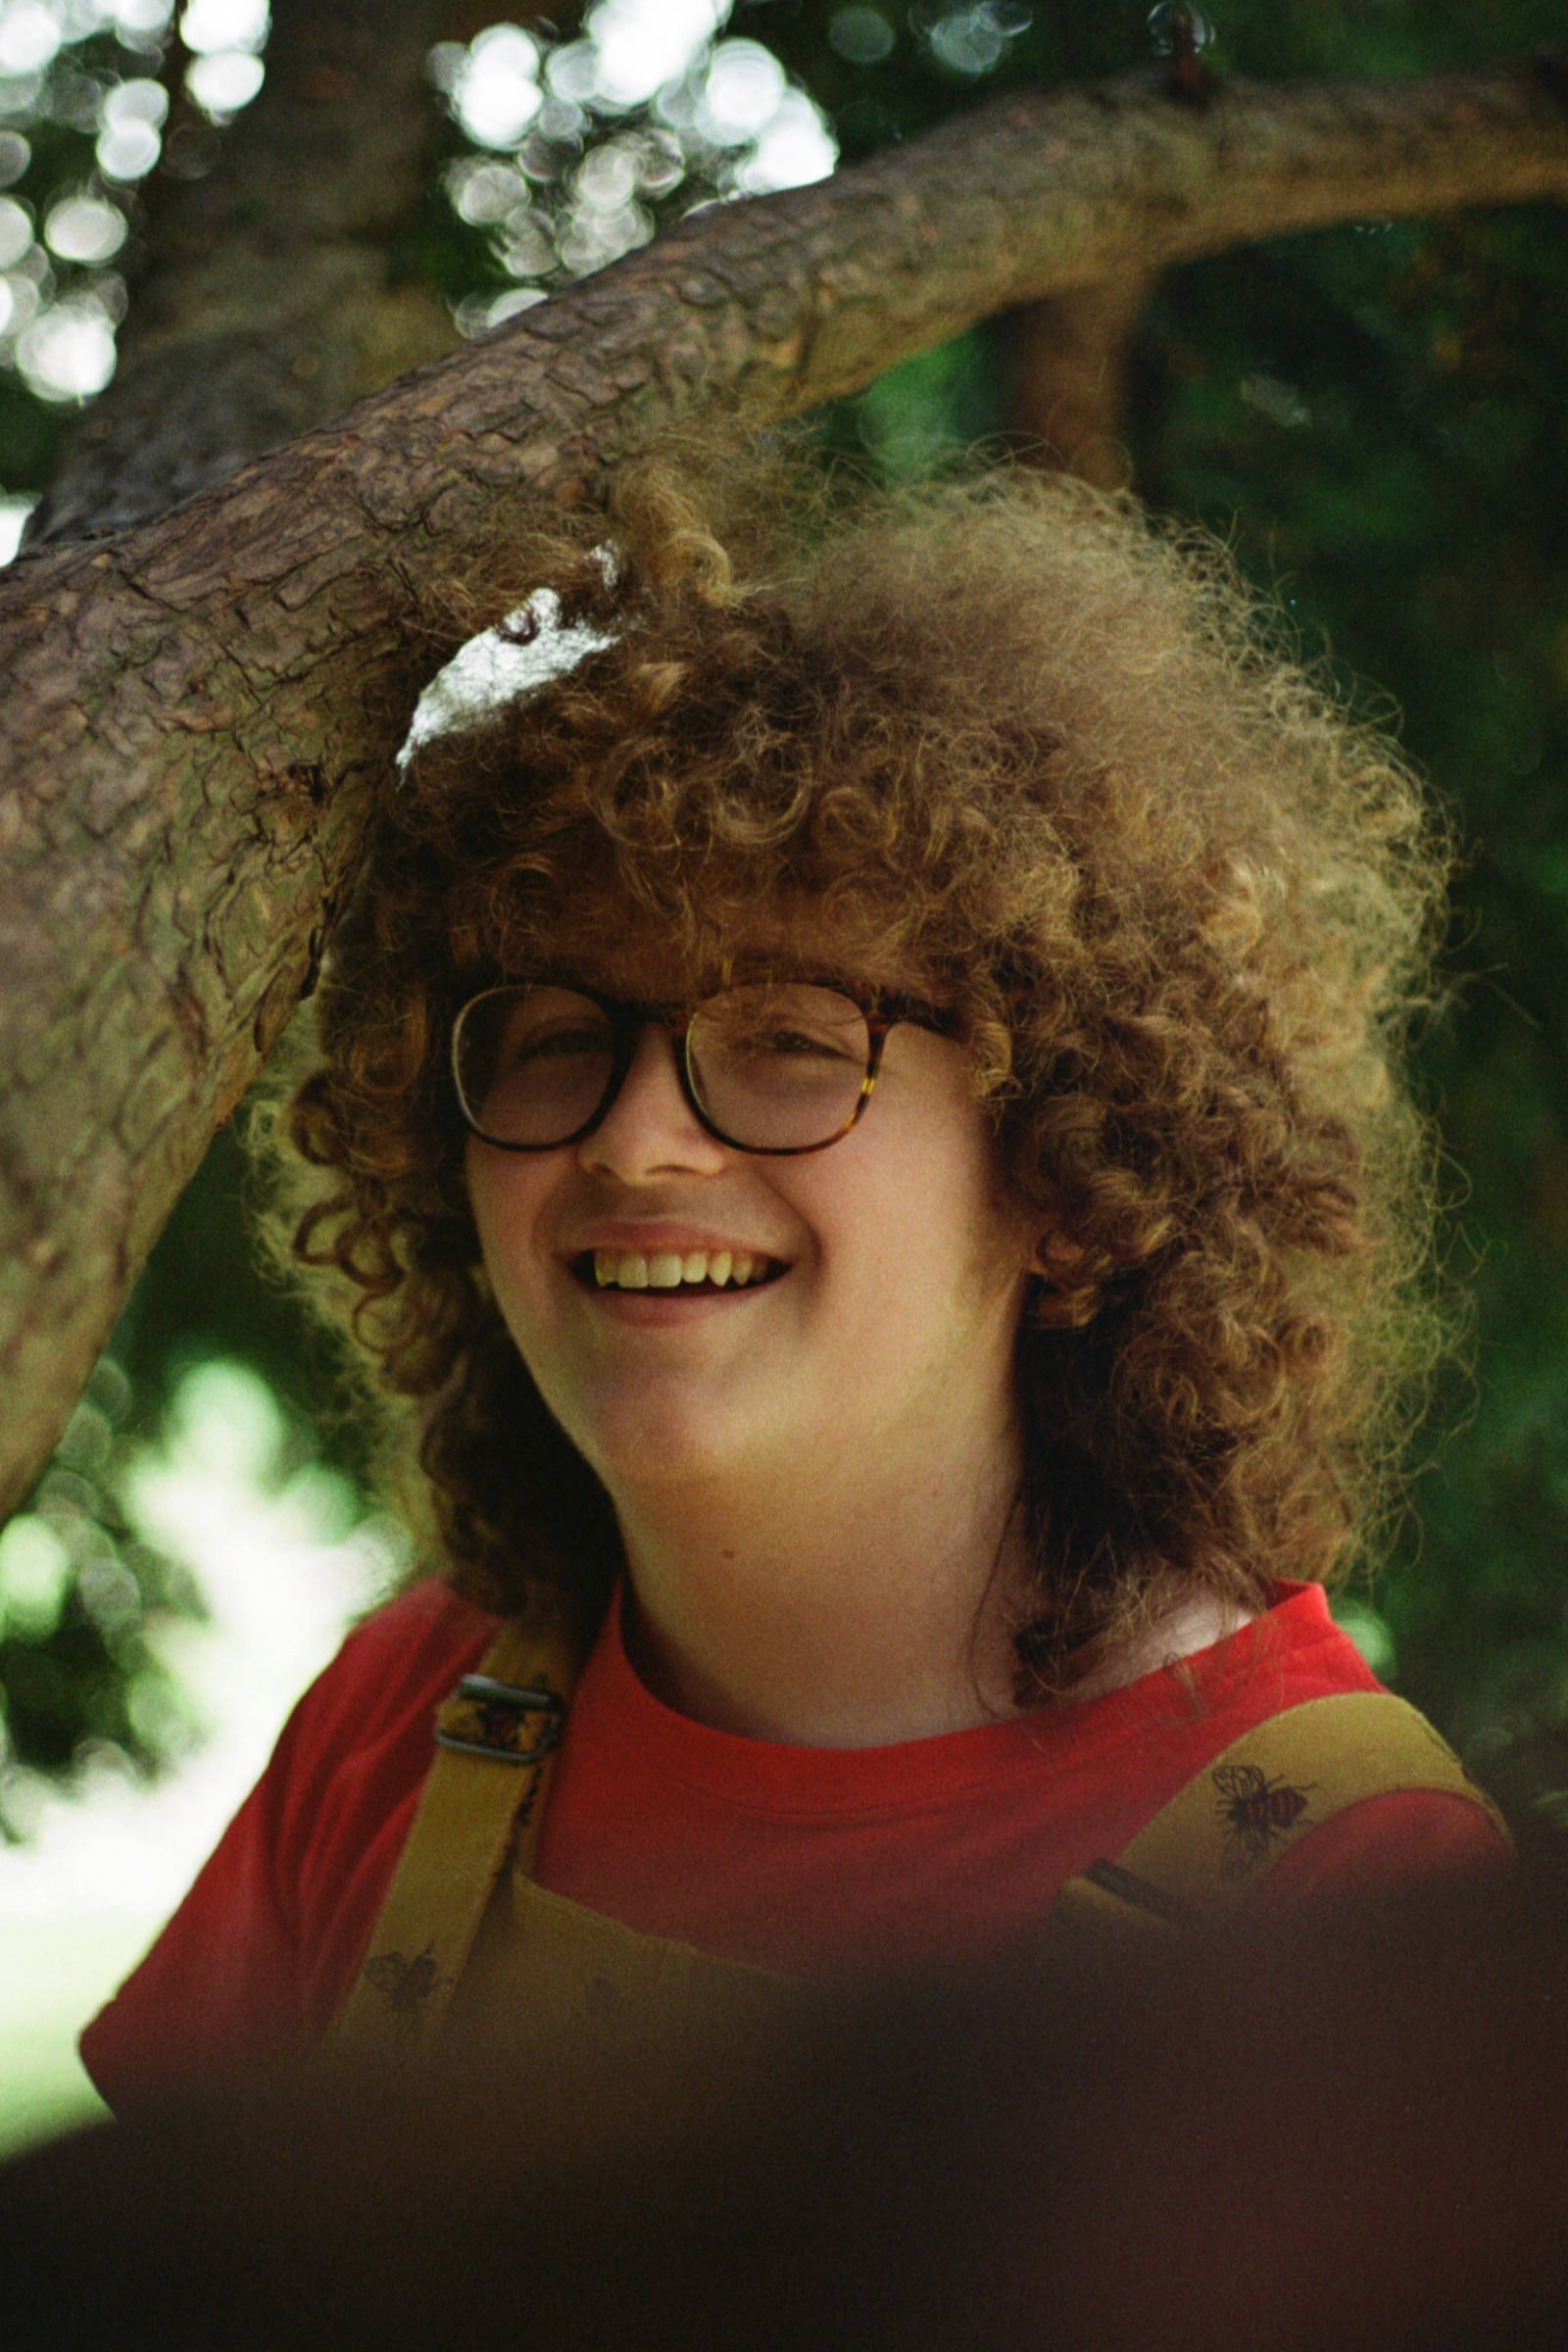 Image: A picture of Robin Thorn in a tree. they are wearing yellow bee print dungarees and a red t-shirt. They have big curly hair and are wearing faux tortoise shel glasses with large round frames. They are smiling